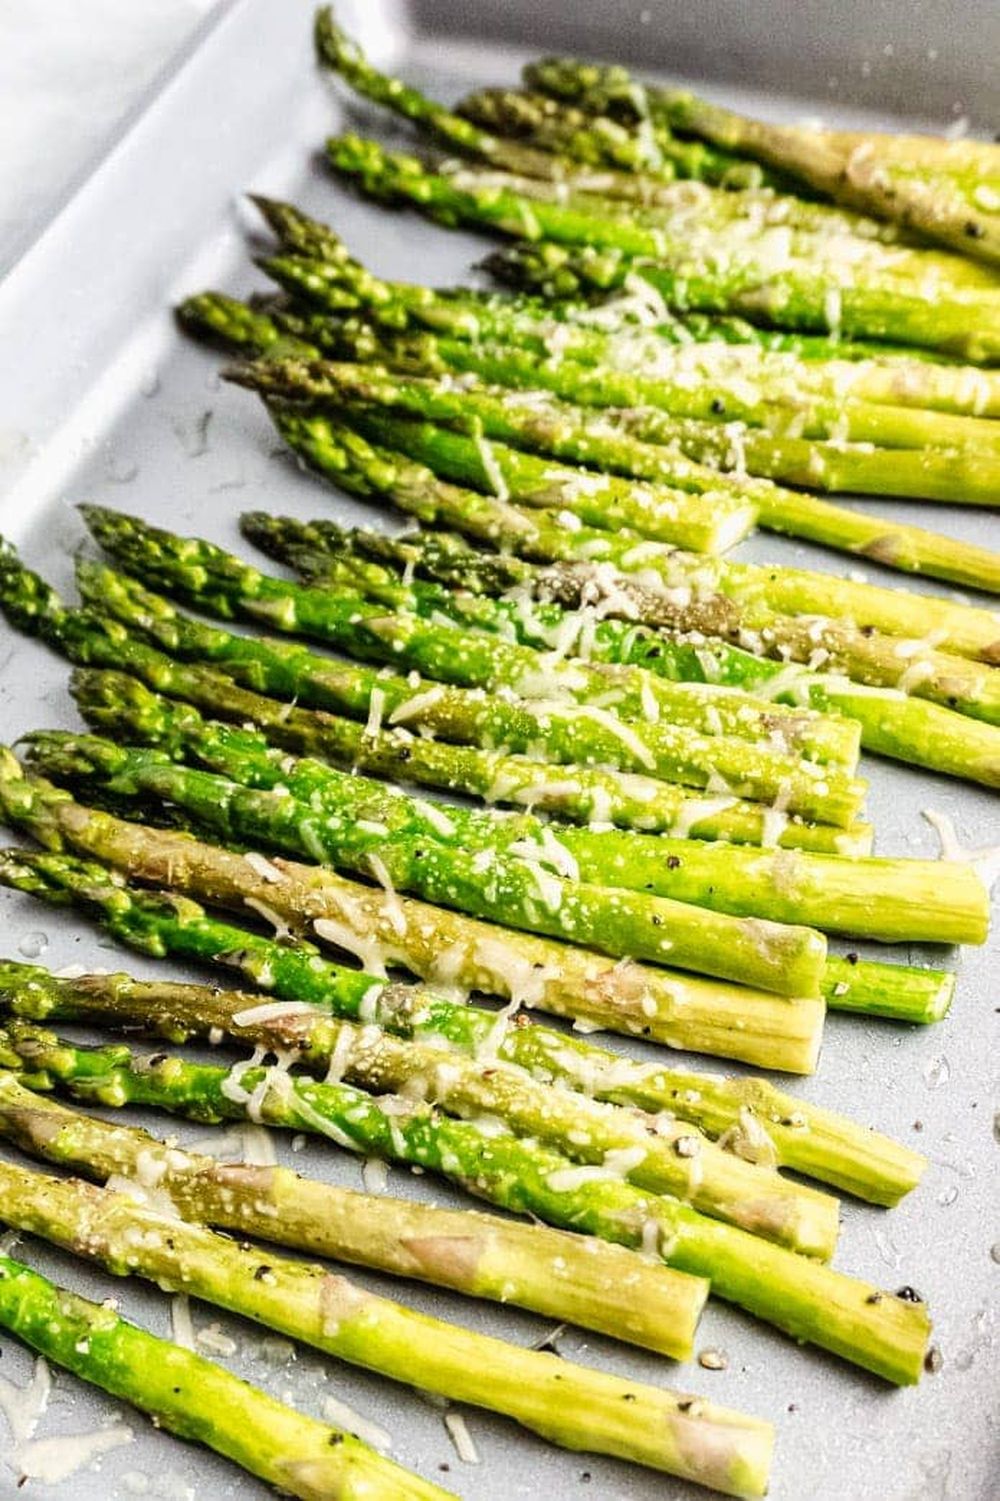 Healthy st patrick's day recipes oven roasted asparagus